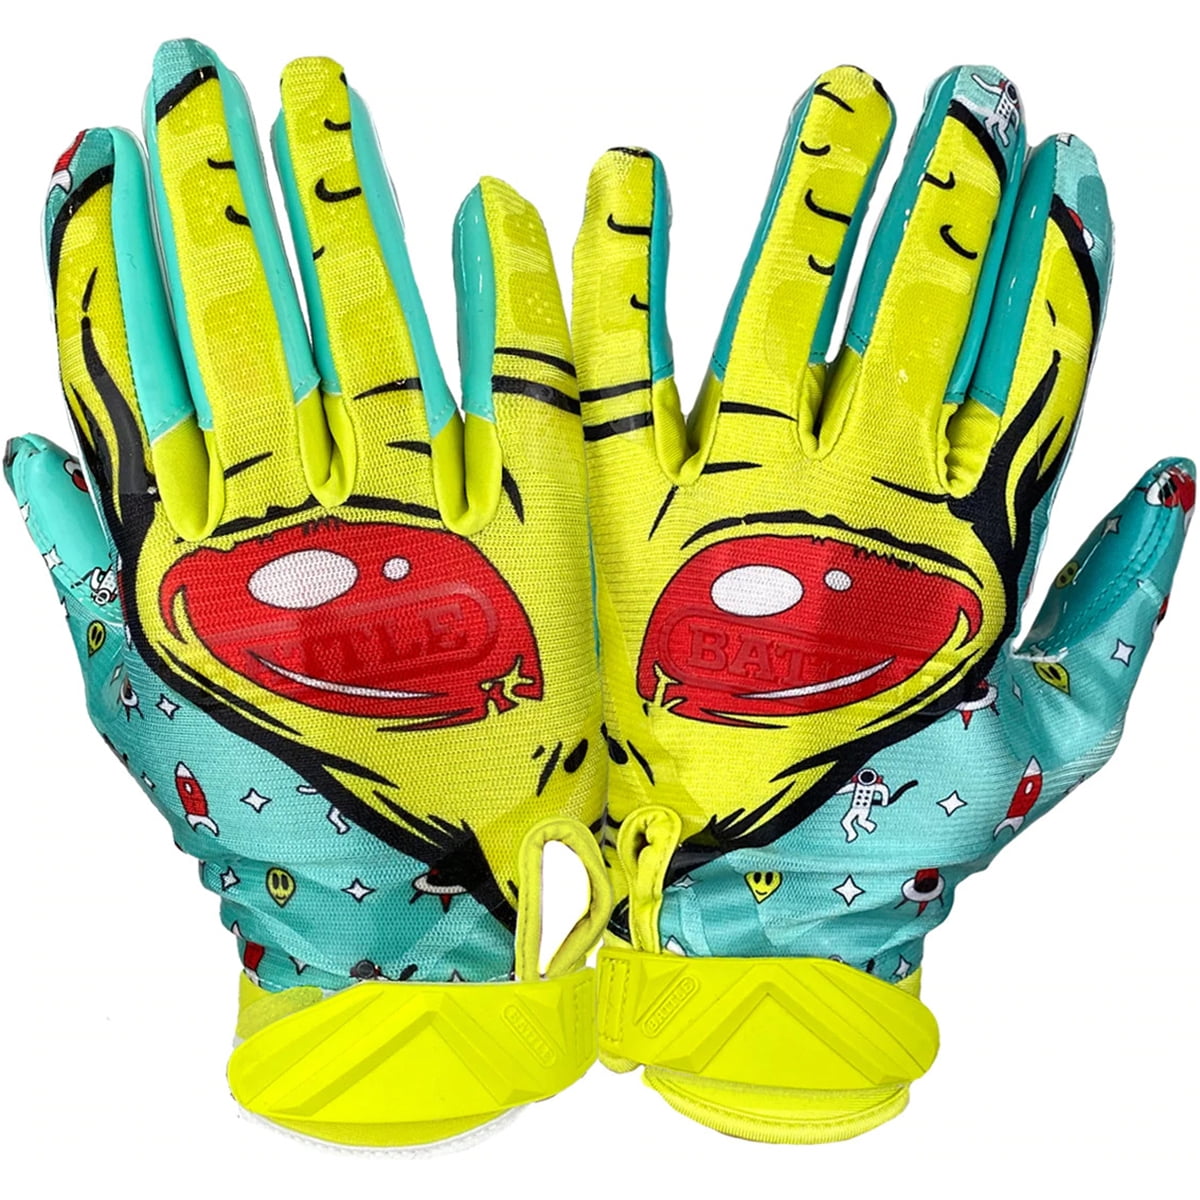 Neon Yellow/Black Battle Sports Science Receivers Ultra-Stick Football Gloves 